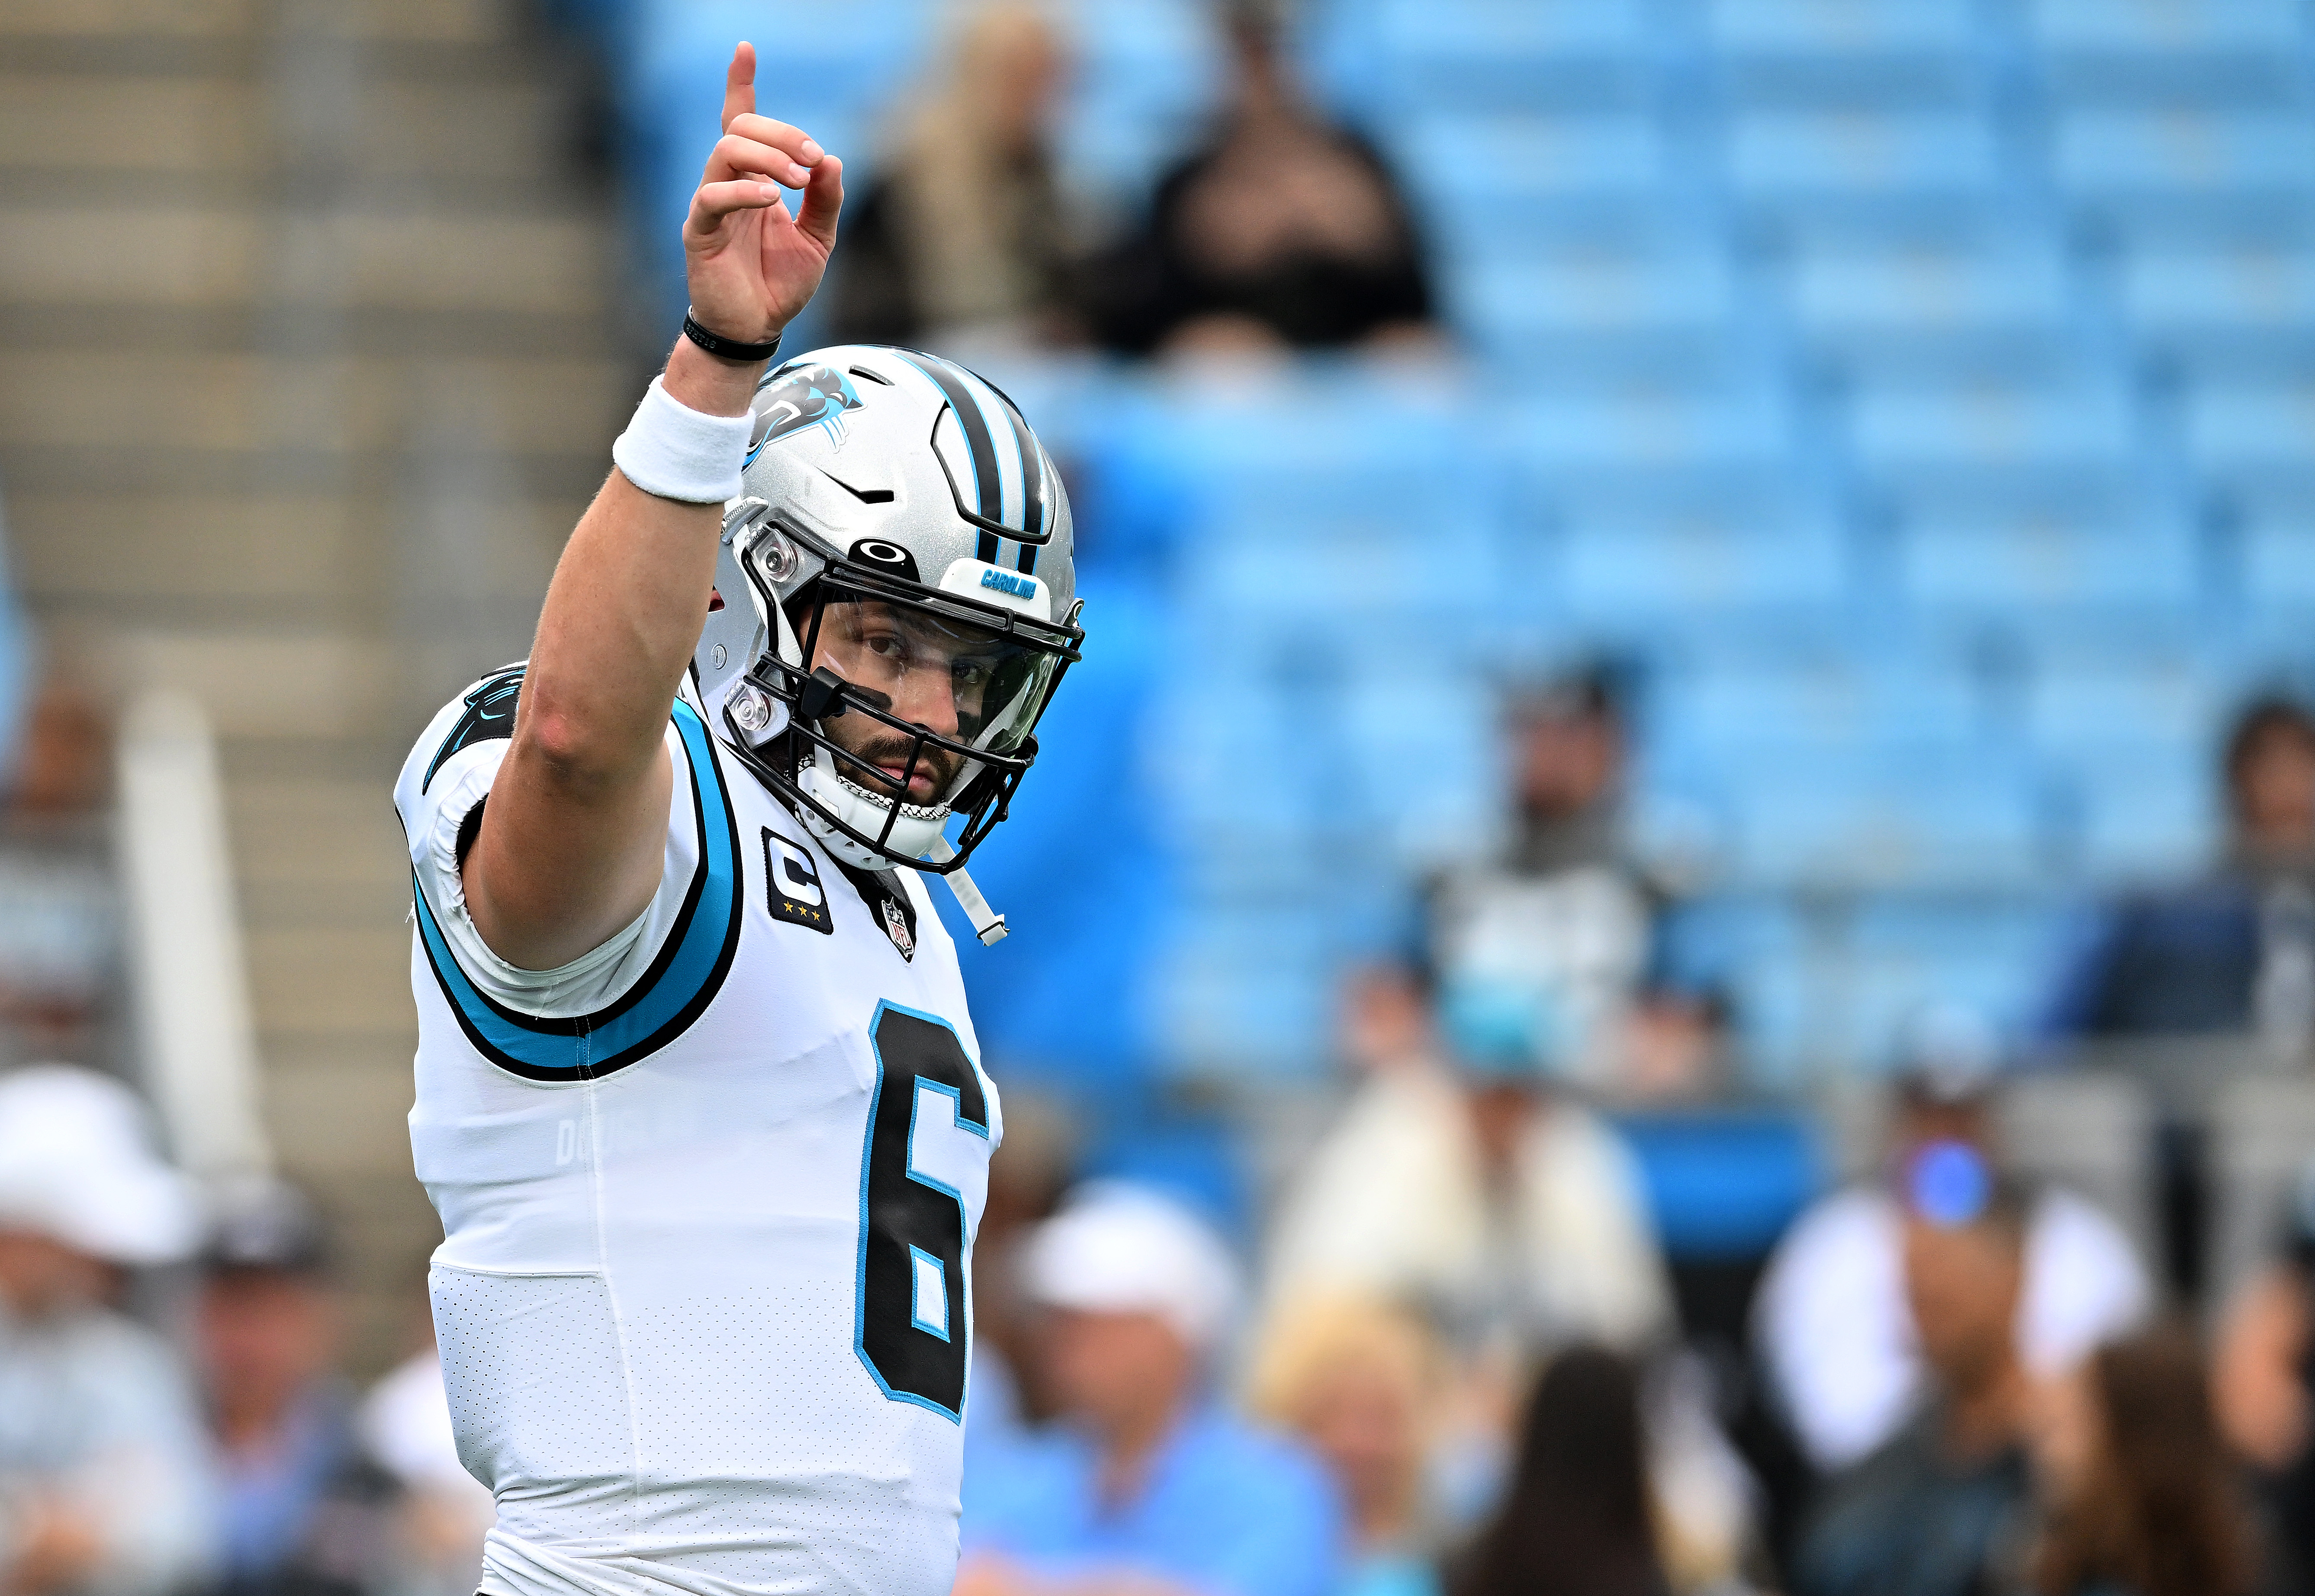 Baker Mayfield of the Carolina Panthers is shown during their game against the New Orleans Saints at Bank of America Stadium on September 25, 2022 in Charlotte, North Carolina.